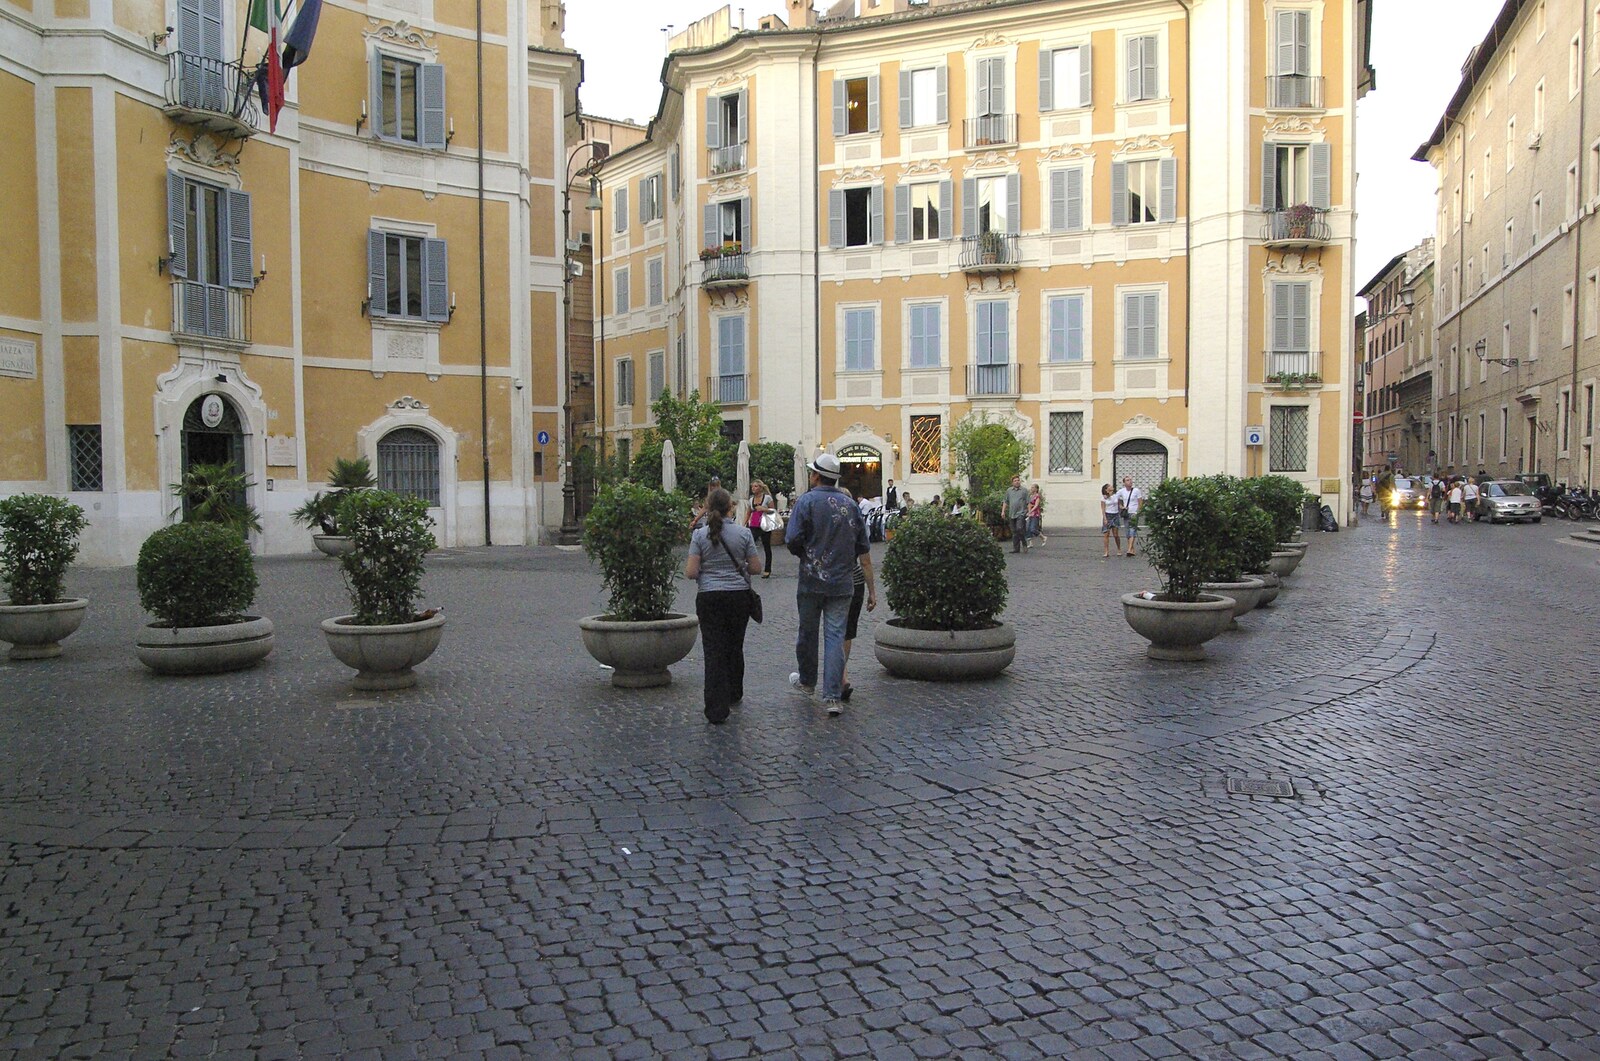 We roam across a quiet square from A Sojourn in The Eternal City, Rome, Italy - 22nd July 2008